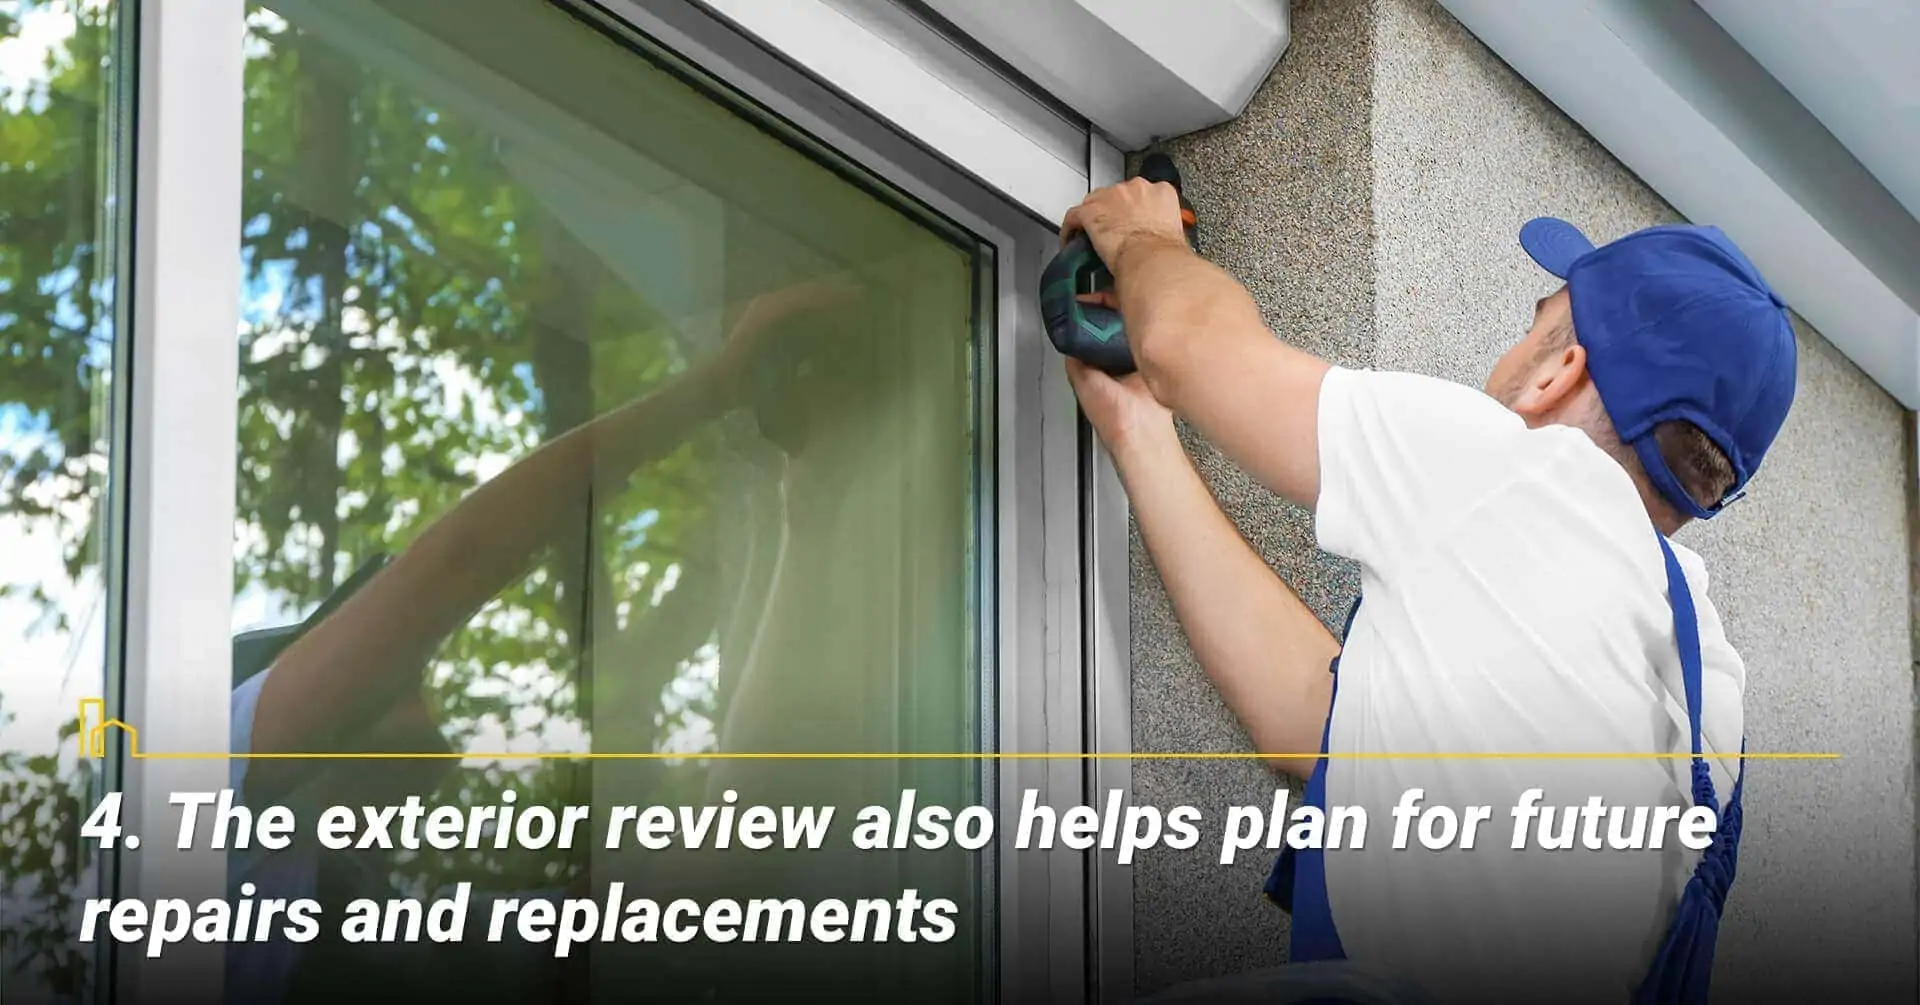 The exterior review also helps plan for future repairs and replacements, home inspection report helps potential home buyers anticipate for future repairs